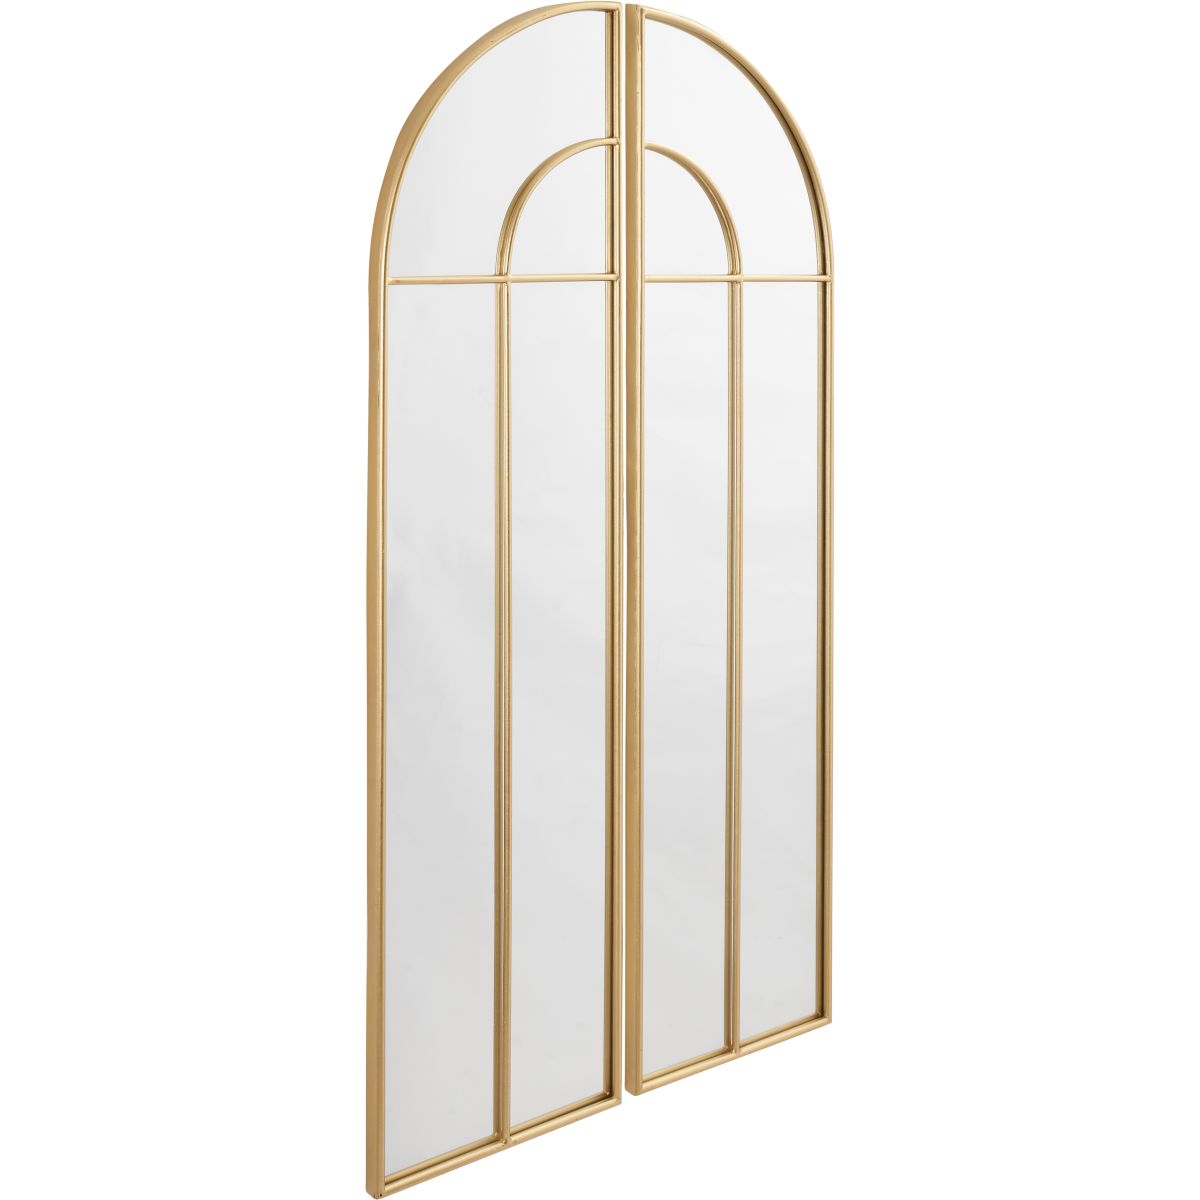 Gold Metal 2 Half Arch Section Wall Mirror